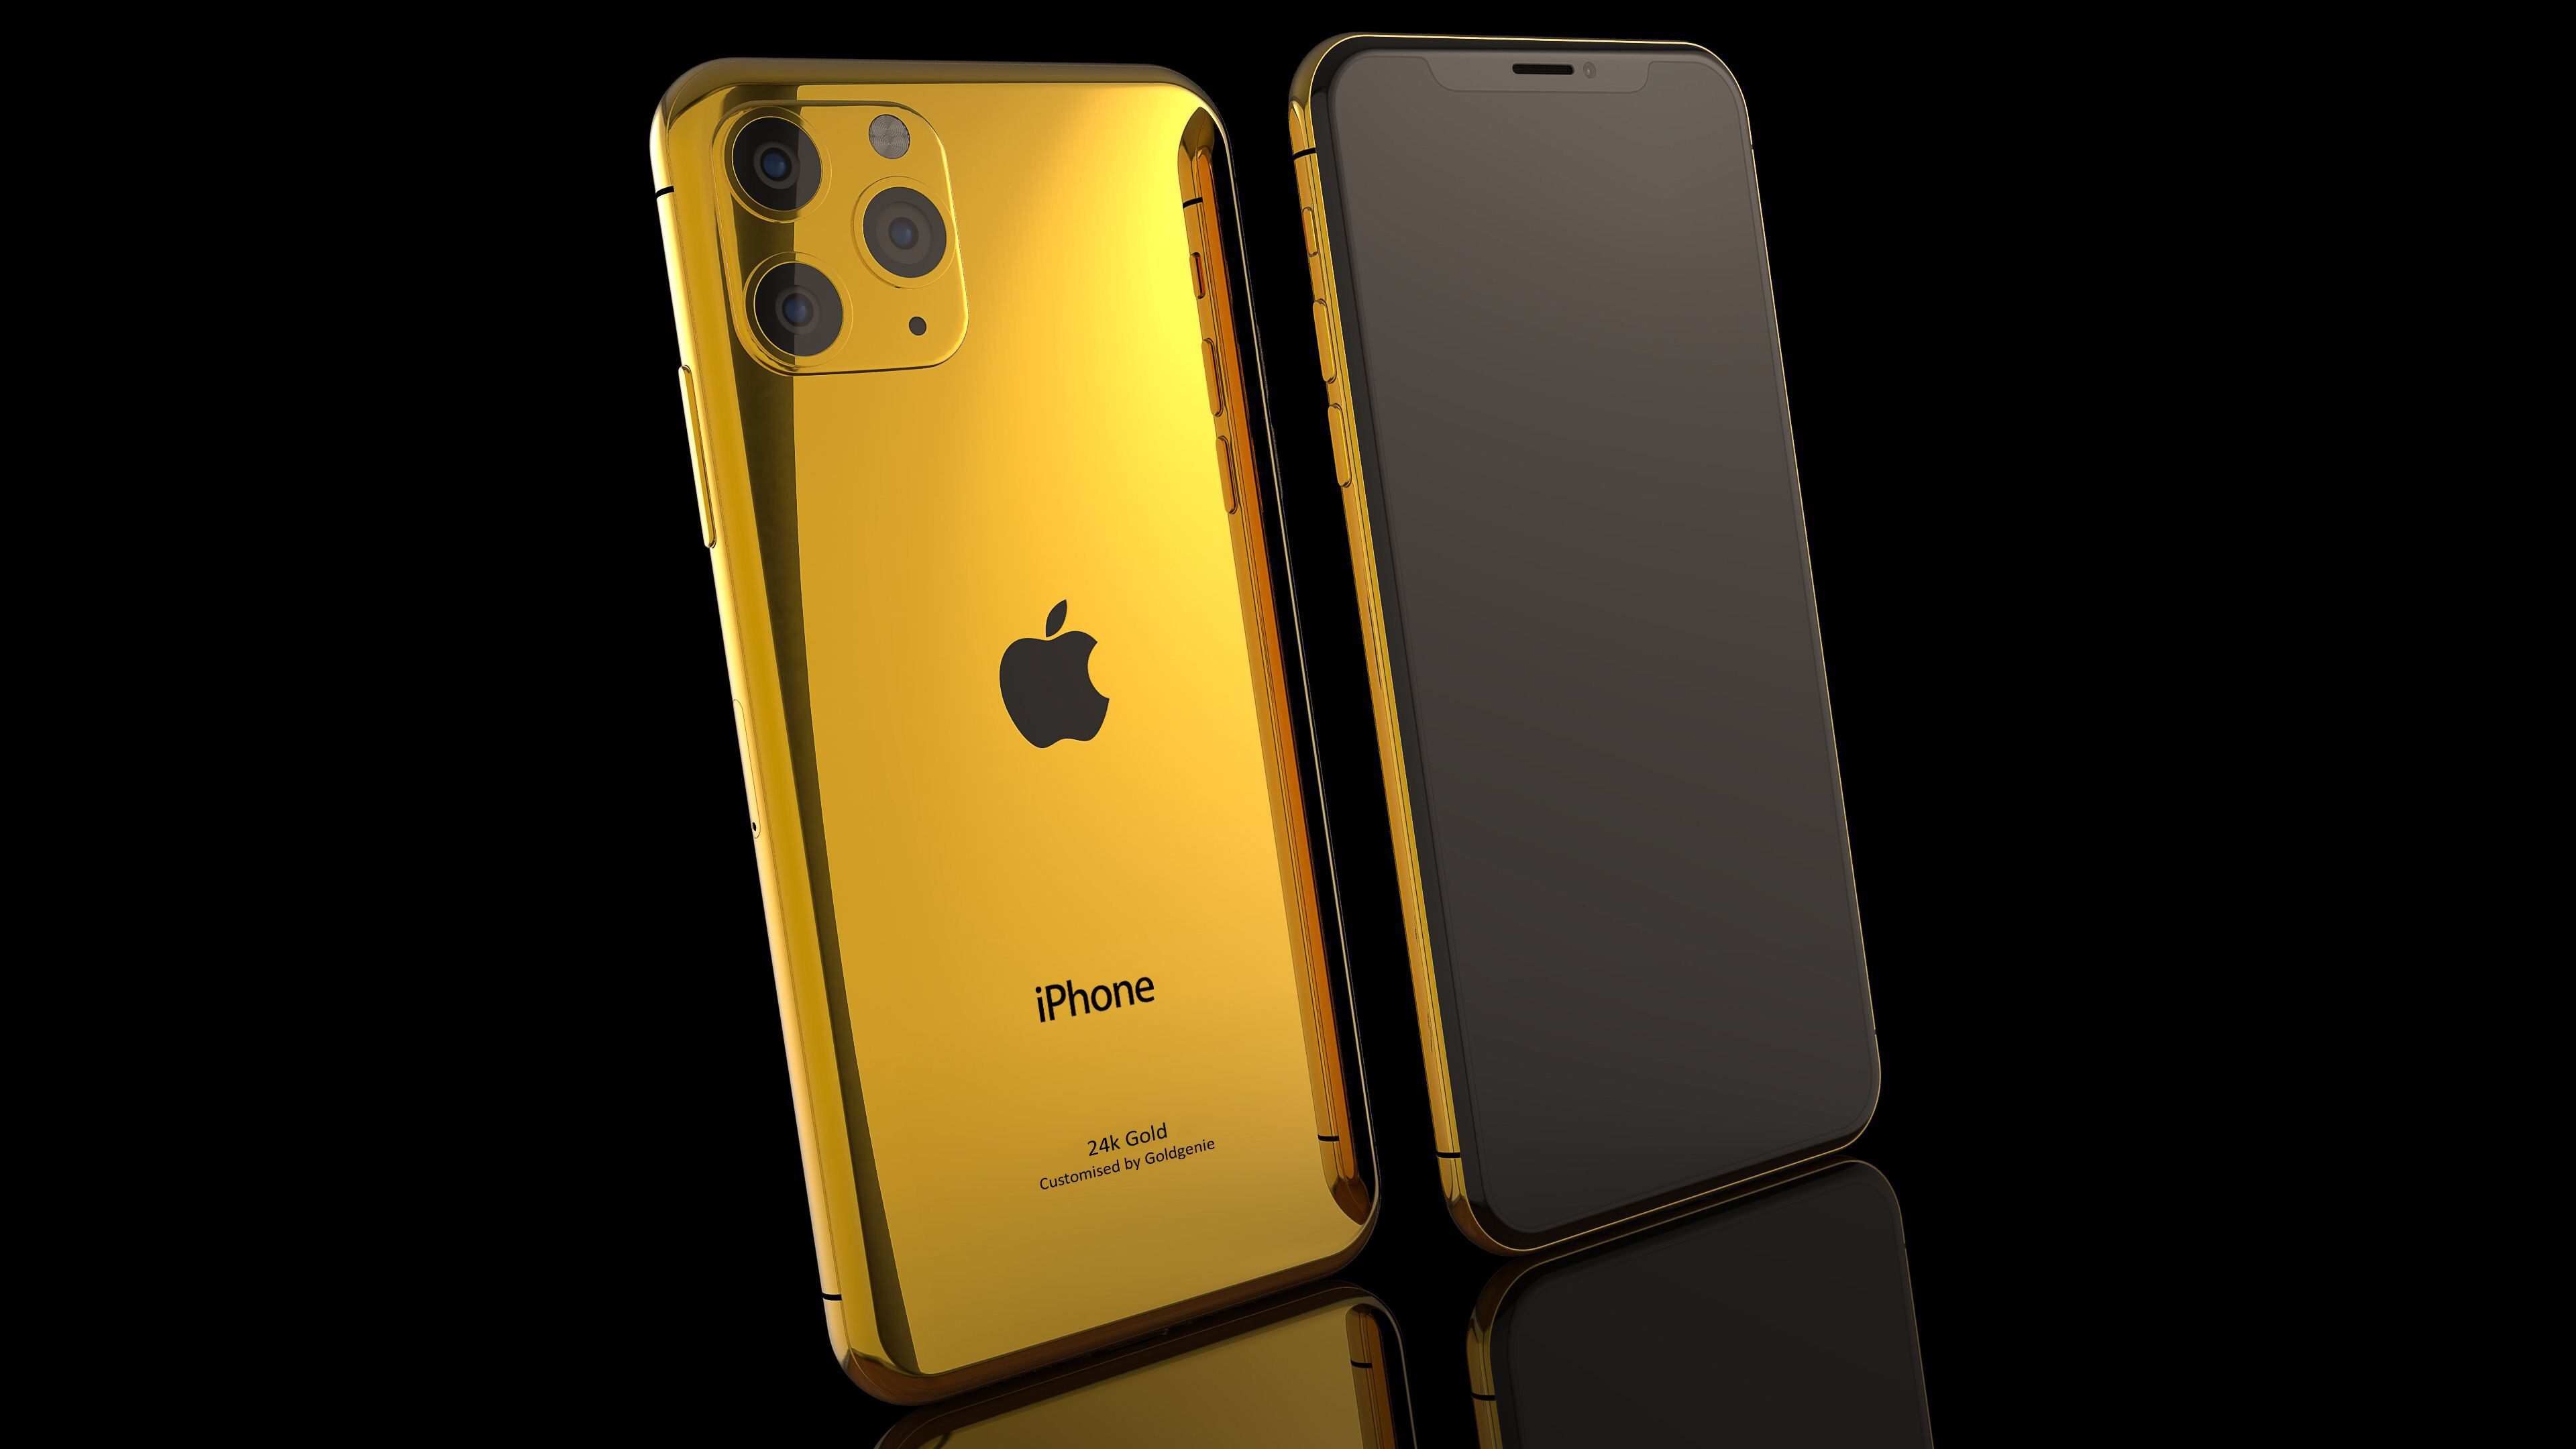 Customise your iPhone Pro/Max in 24k Gold, Rose Gold or Platinum